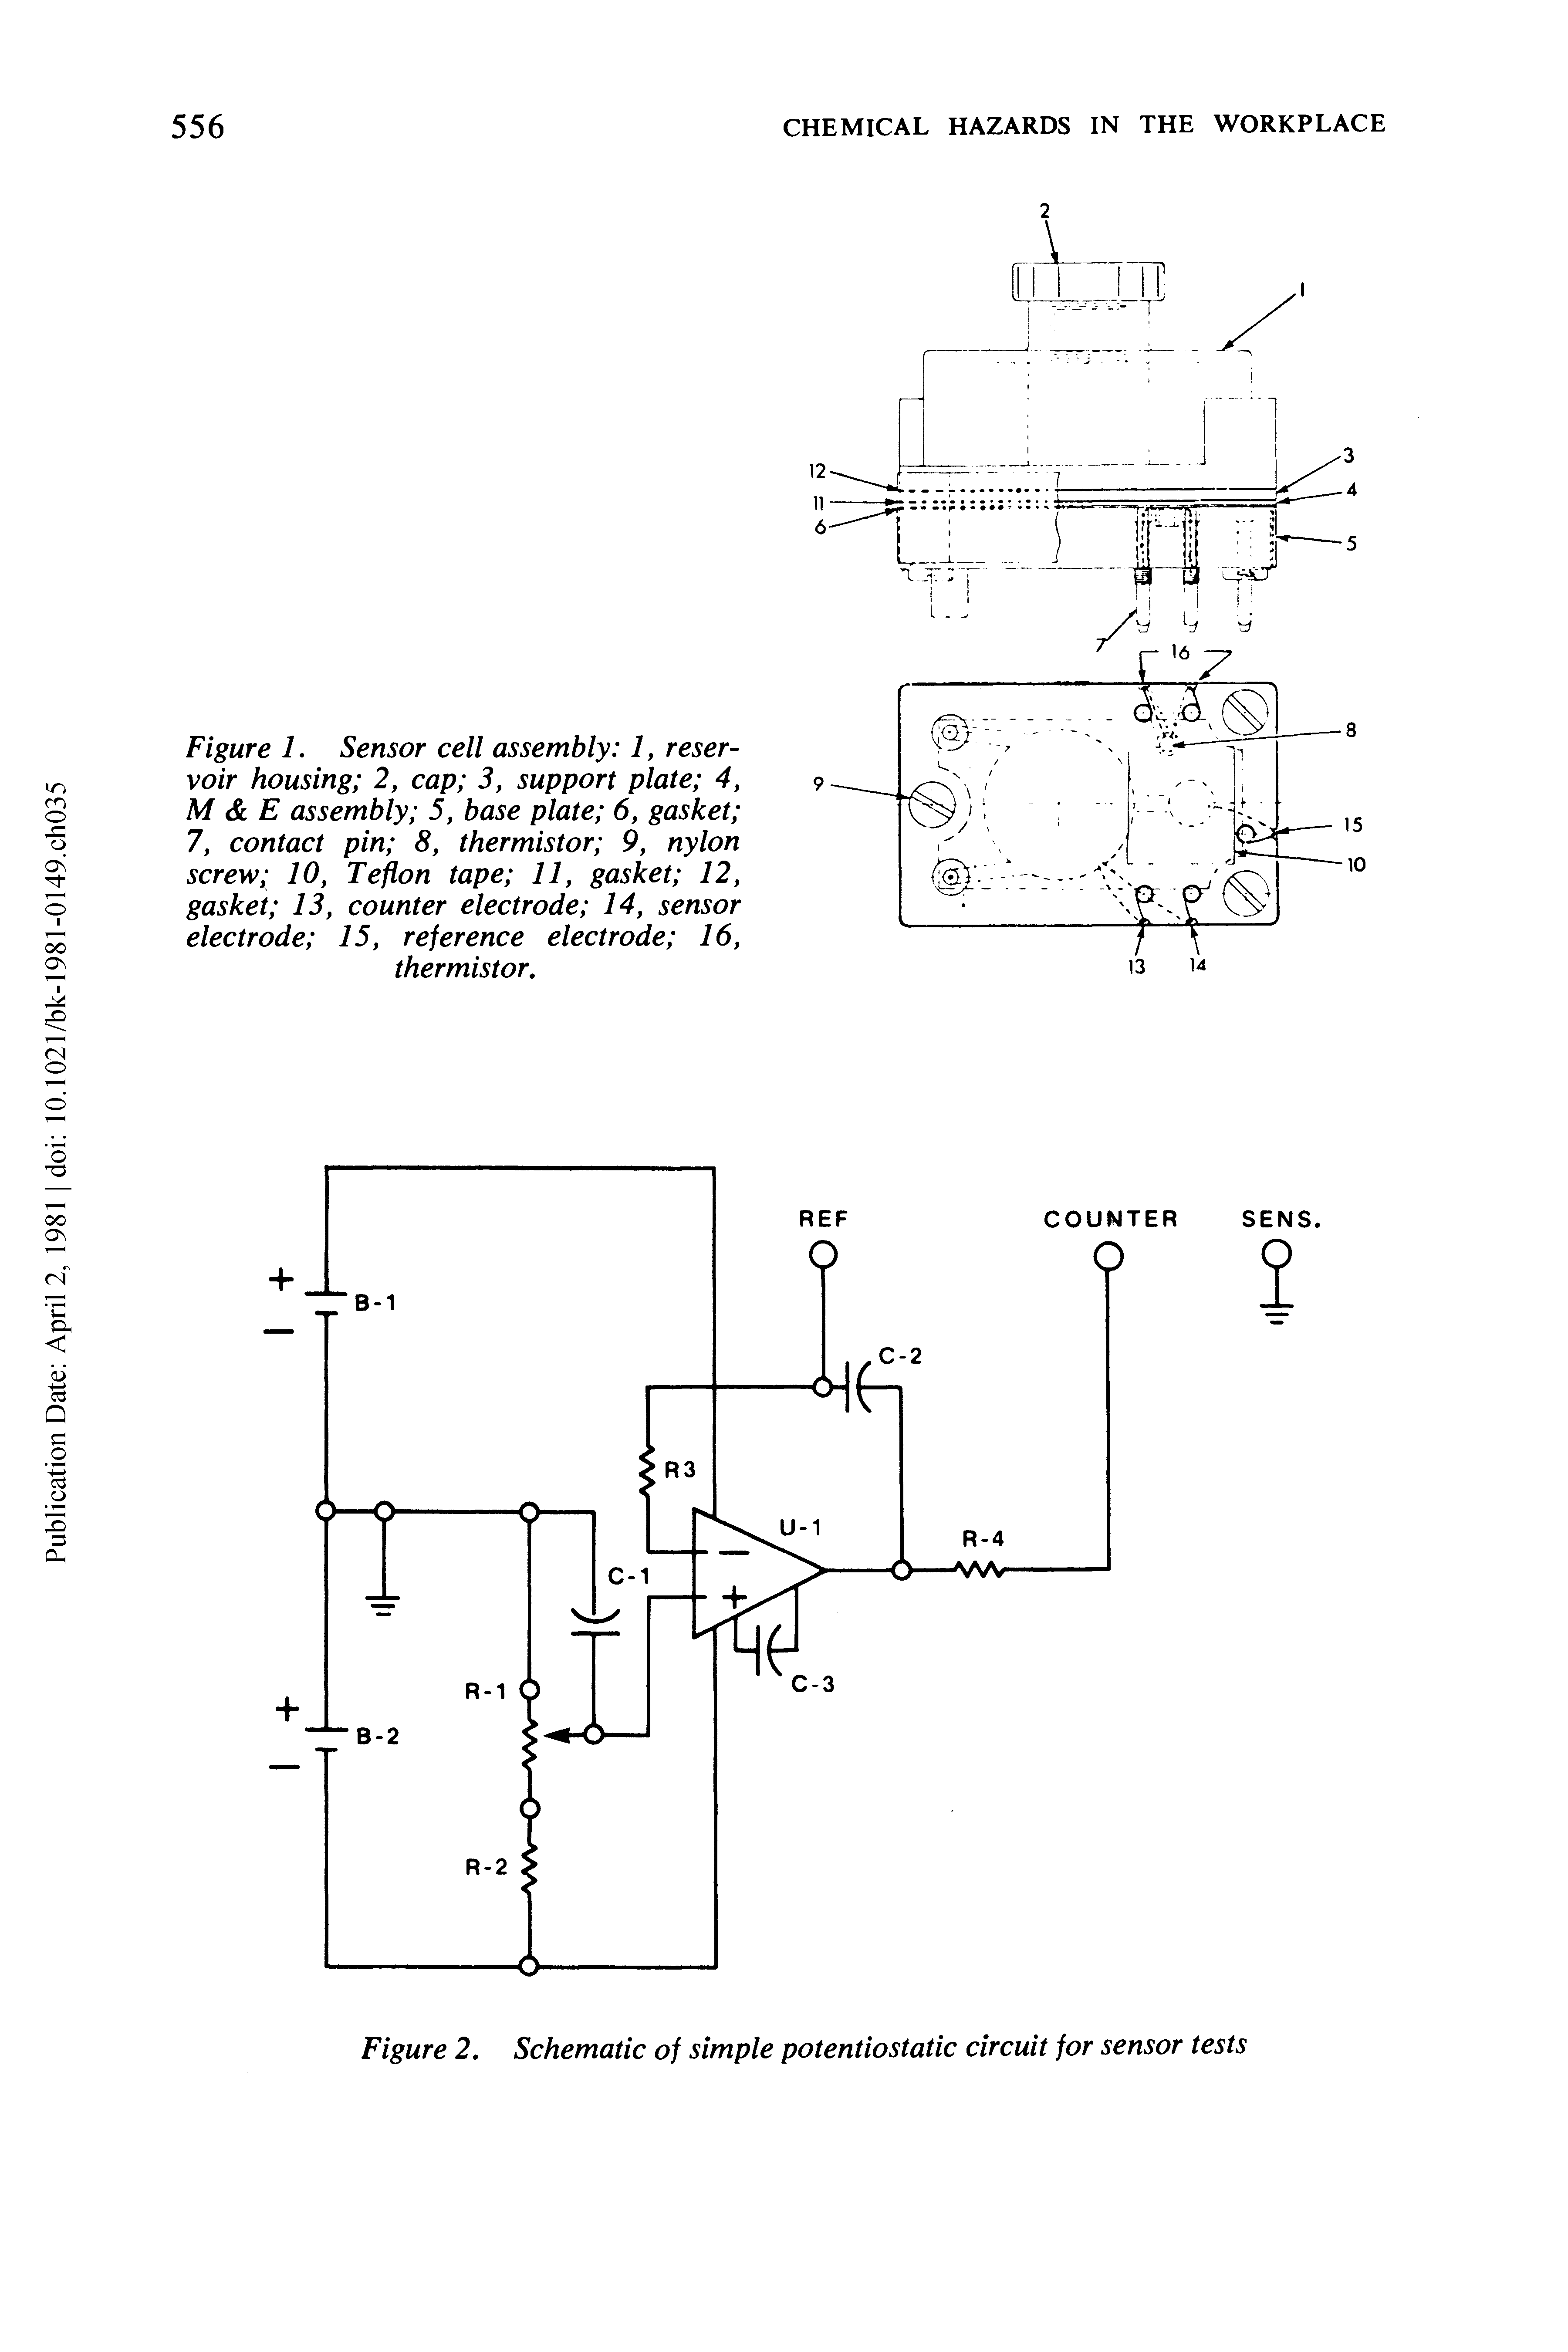 Figure 2. Schematic of simple potentiostatic circuit for sensor tests...